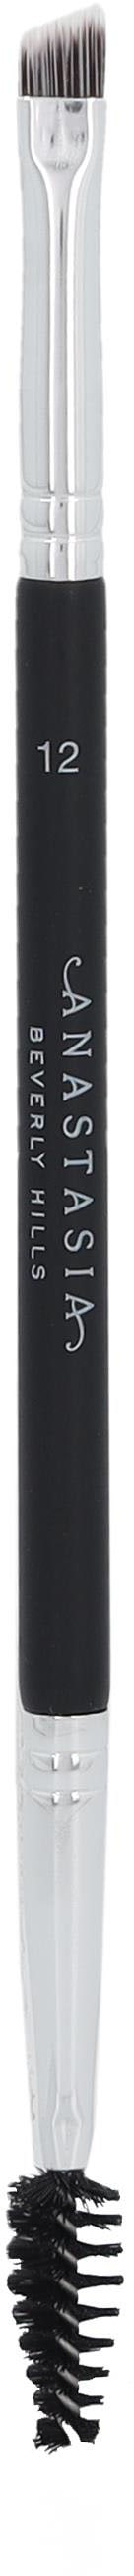 ANASTASIA BEVERLY HILLS Augenbrauenpinsel »Dual Ended Firm End...